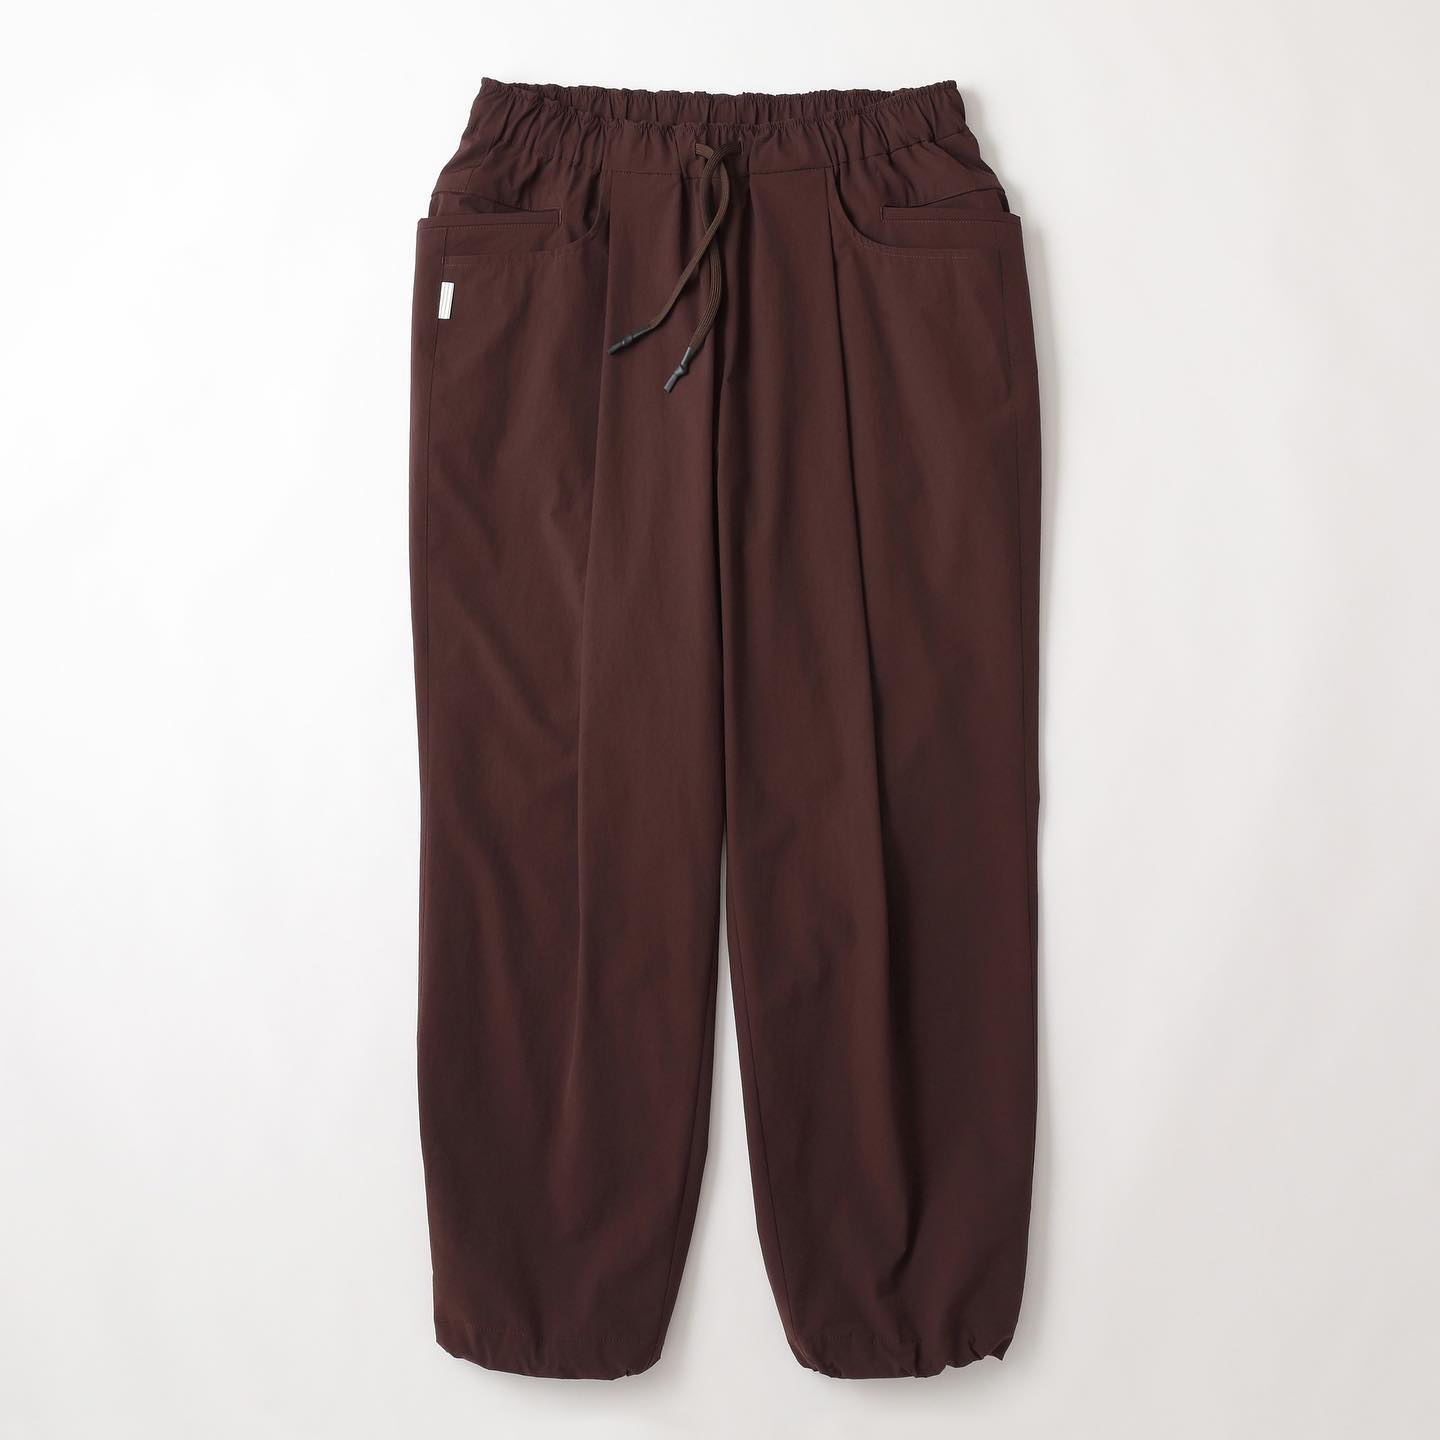 SEE SEE WIDE TAPERED EASY PANTS NYLON XL